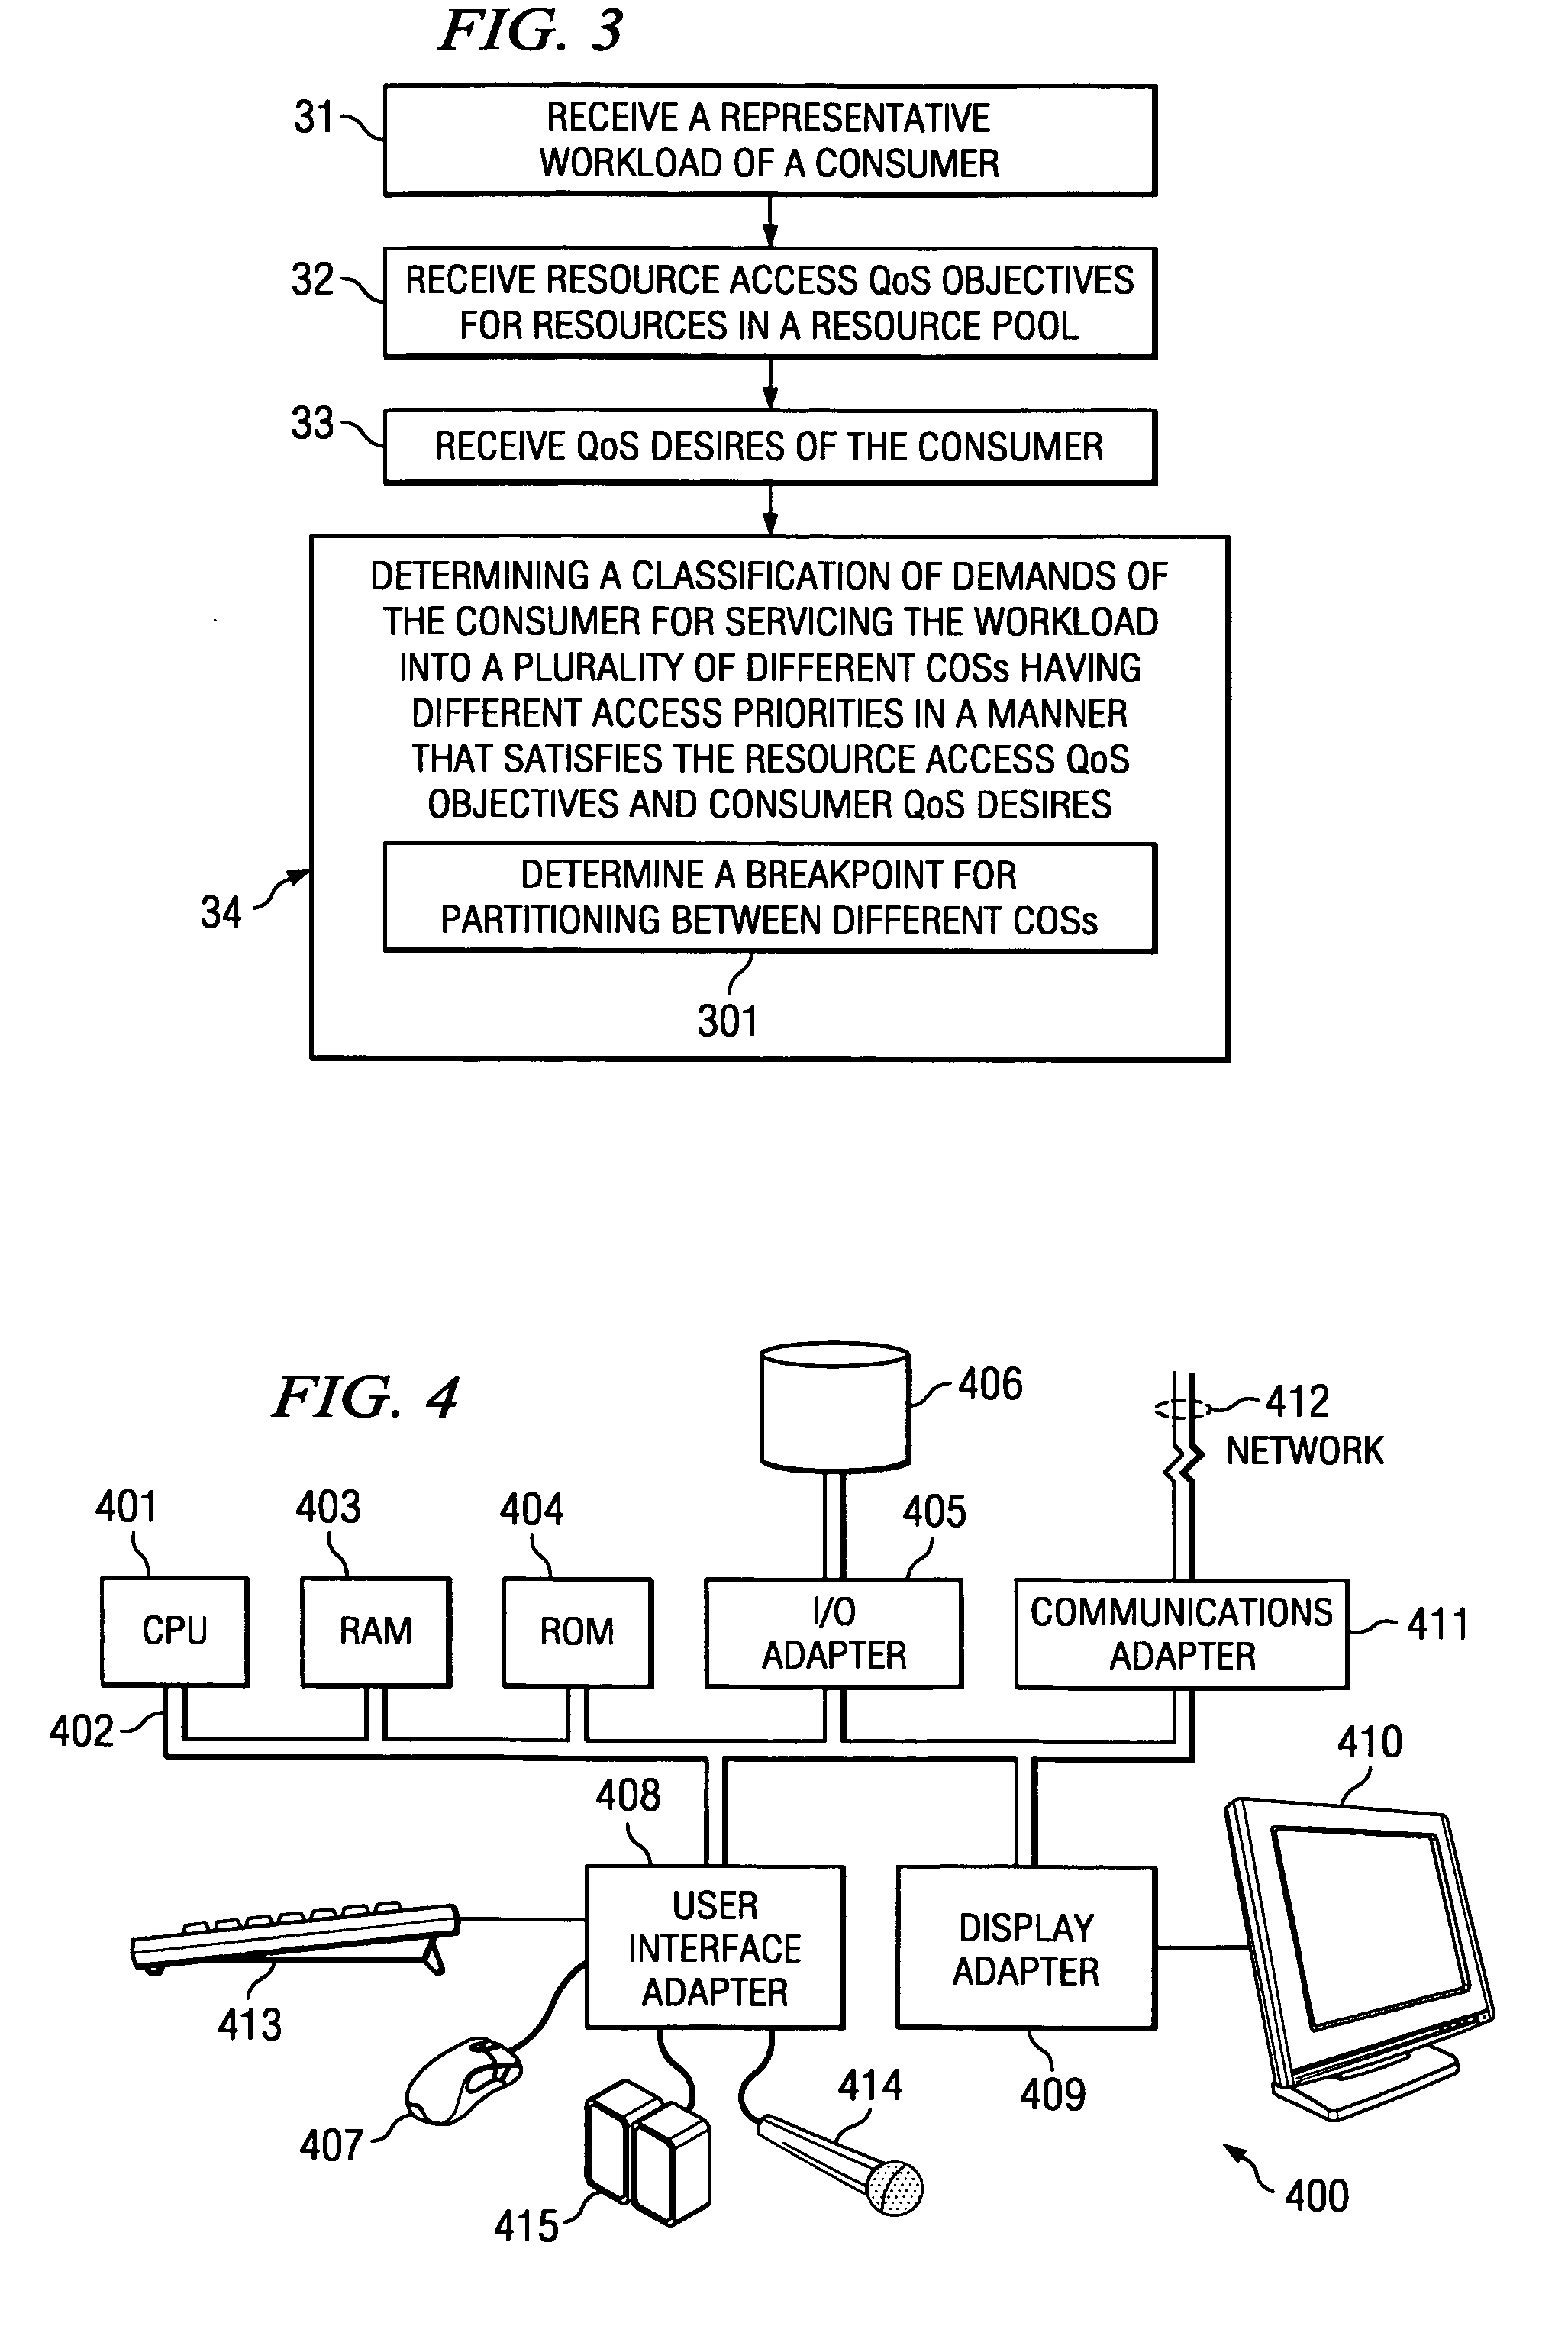 System and method for determining a partition of a consumer's resource access demands between a plurality of different classes of service